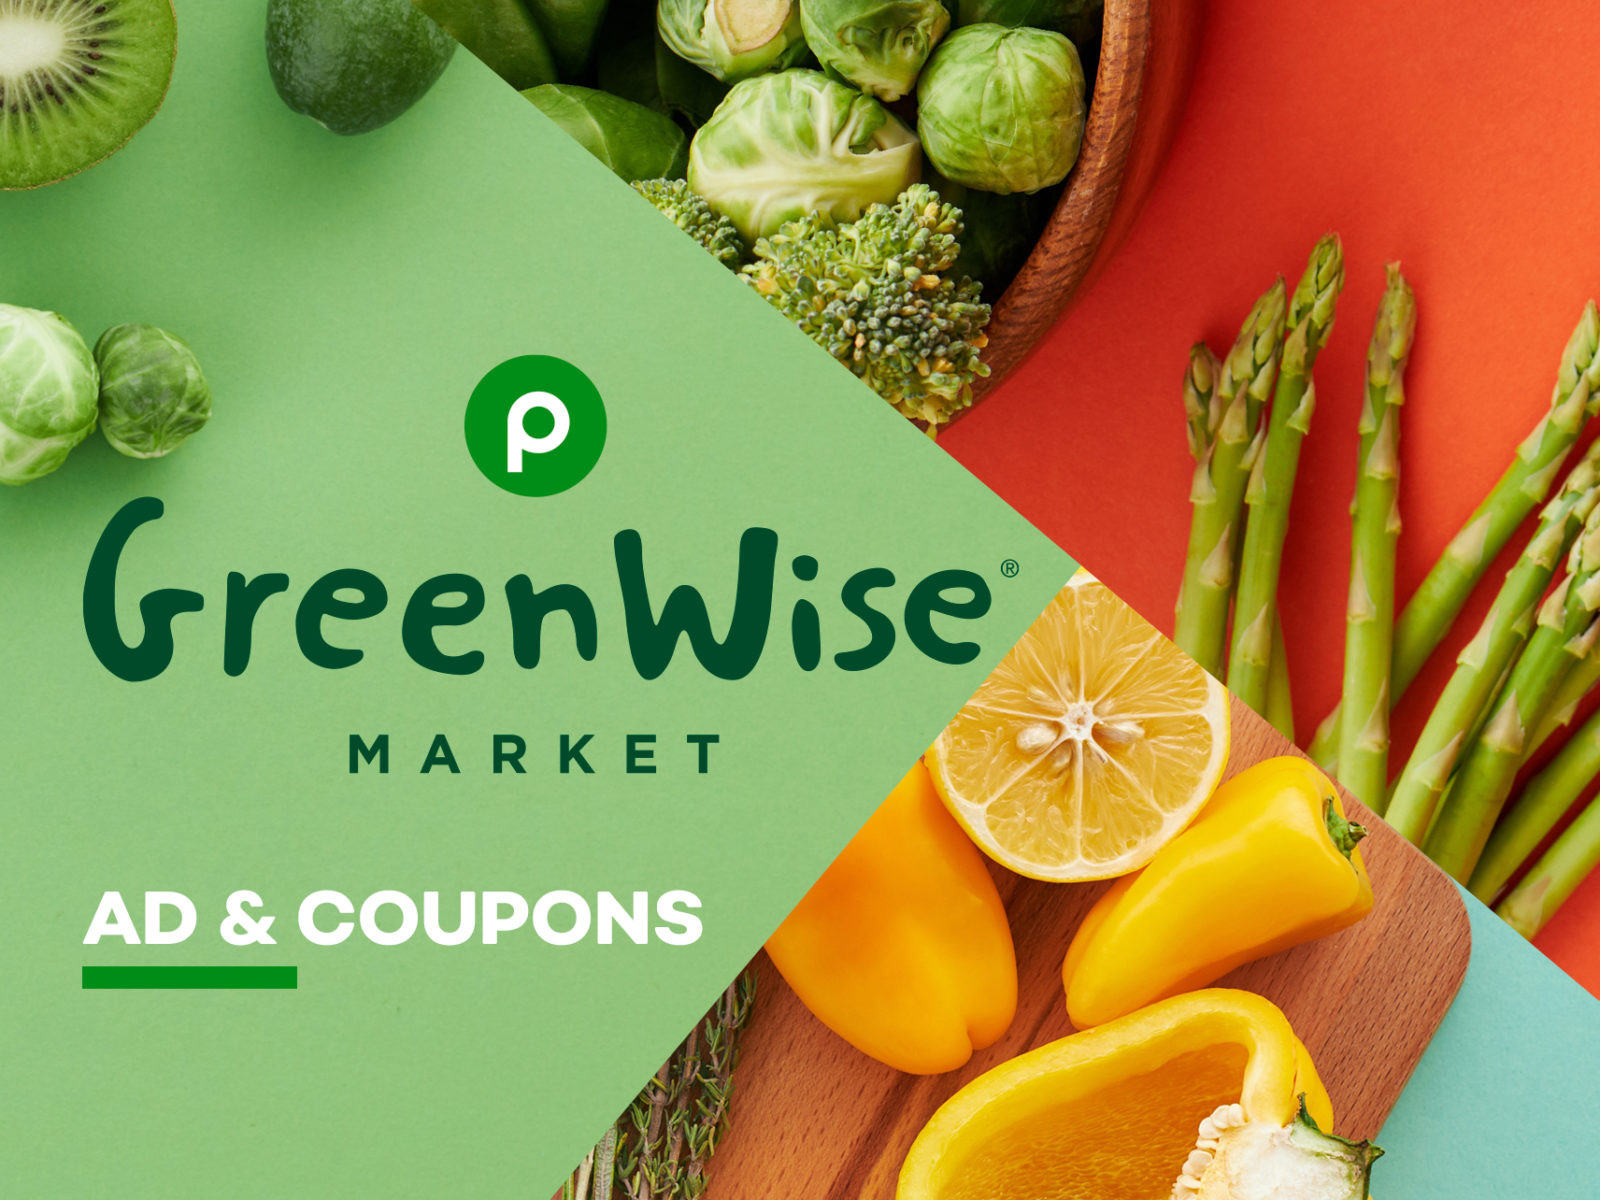 Publix GreenWise Market Ad & Coupons Week Of 11/2 to 11/8 (11/1 to 11/7 For Some)